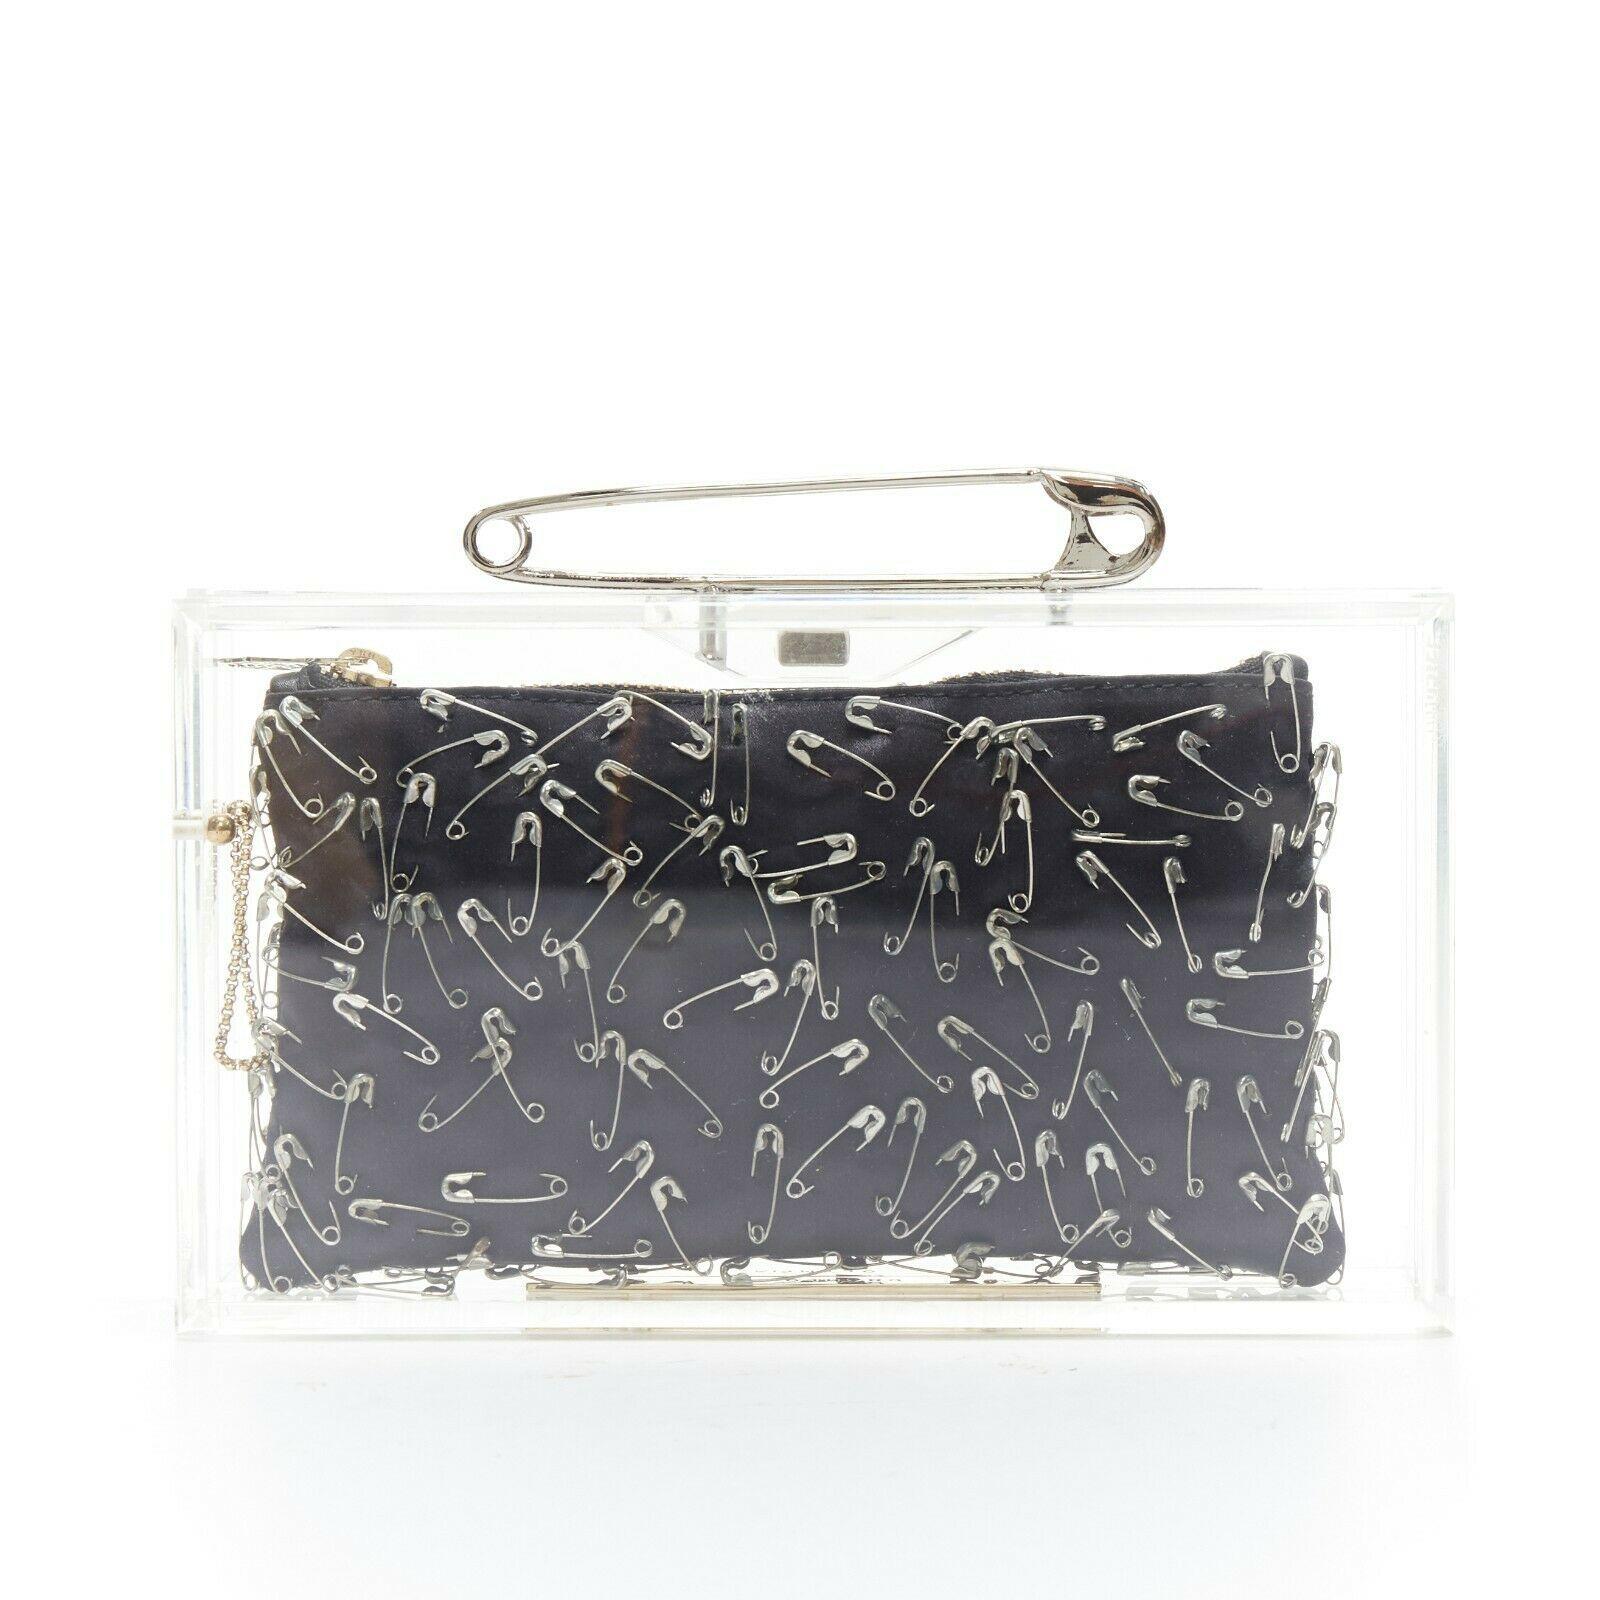 safety pin clutch